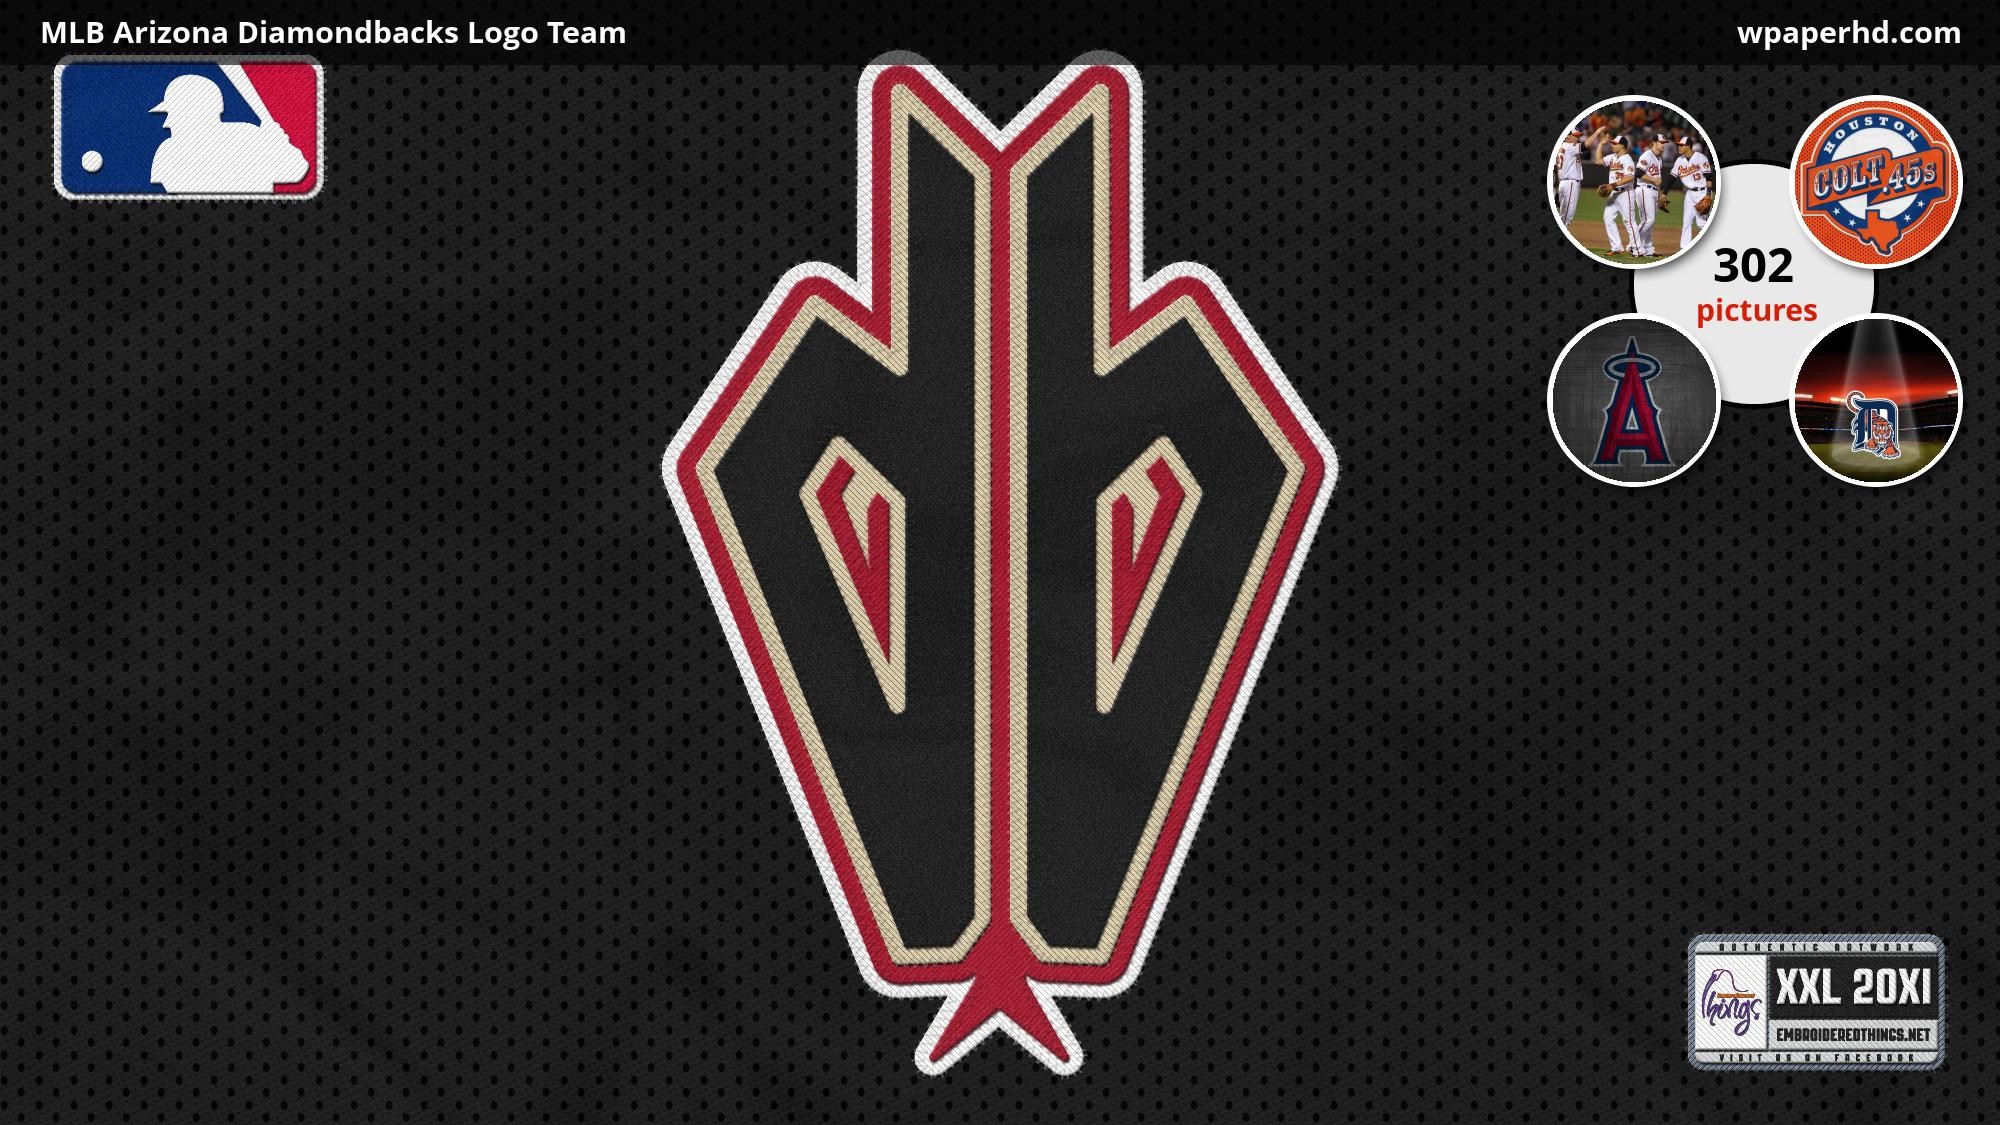 2000x1125 ... Arizona Diamondbacks Logo Team wallpaper, where you can download this  picture in Original size and ...